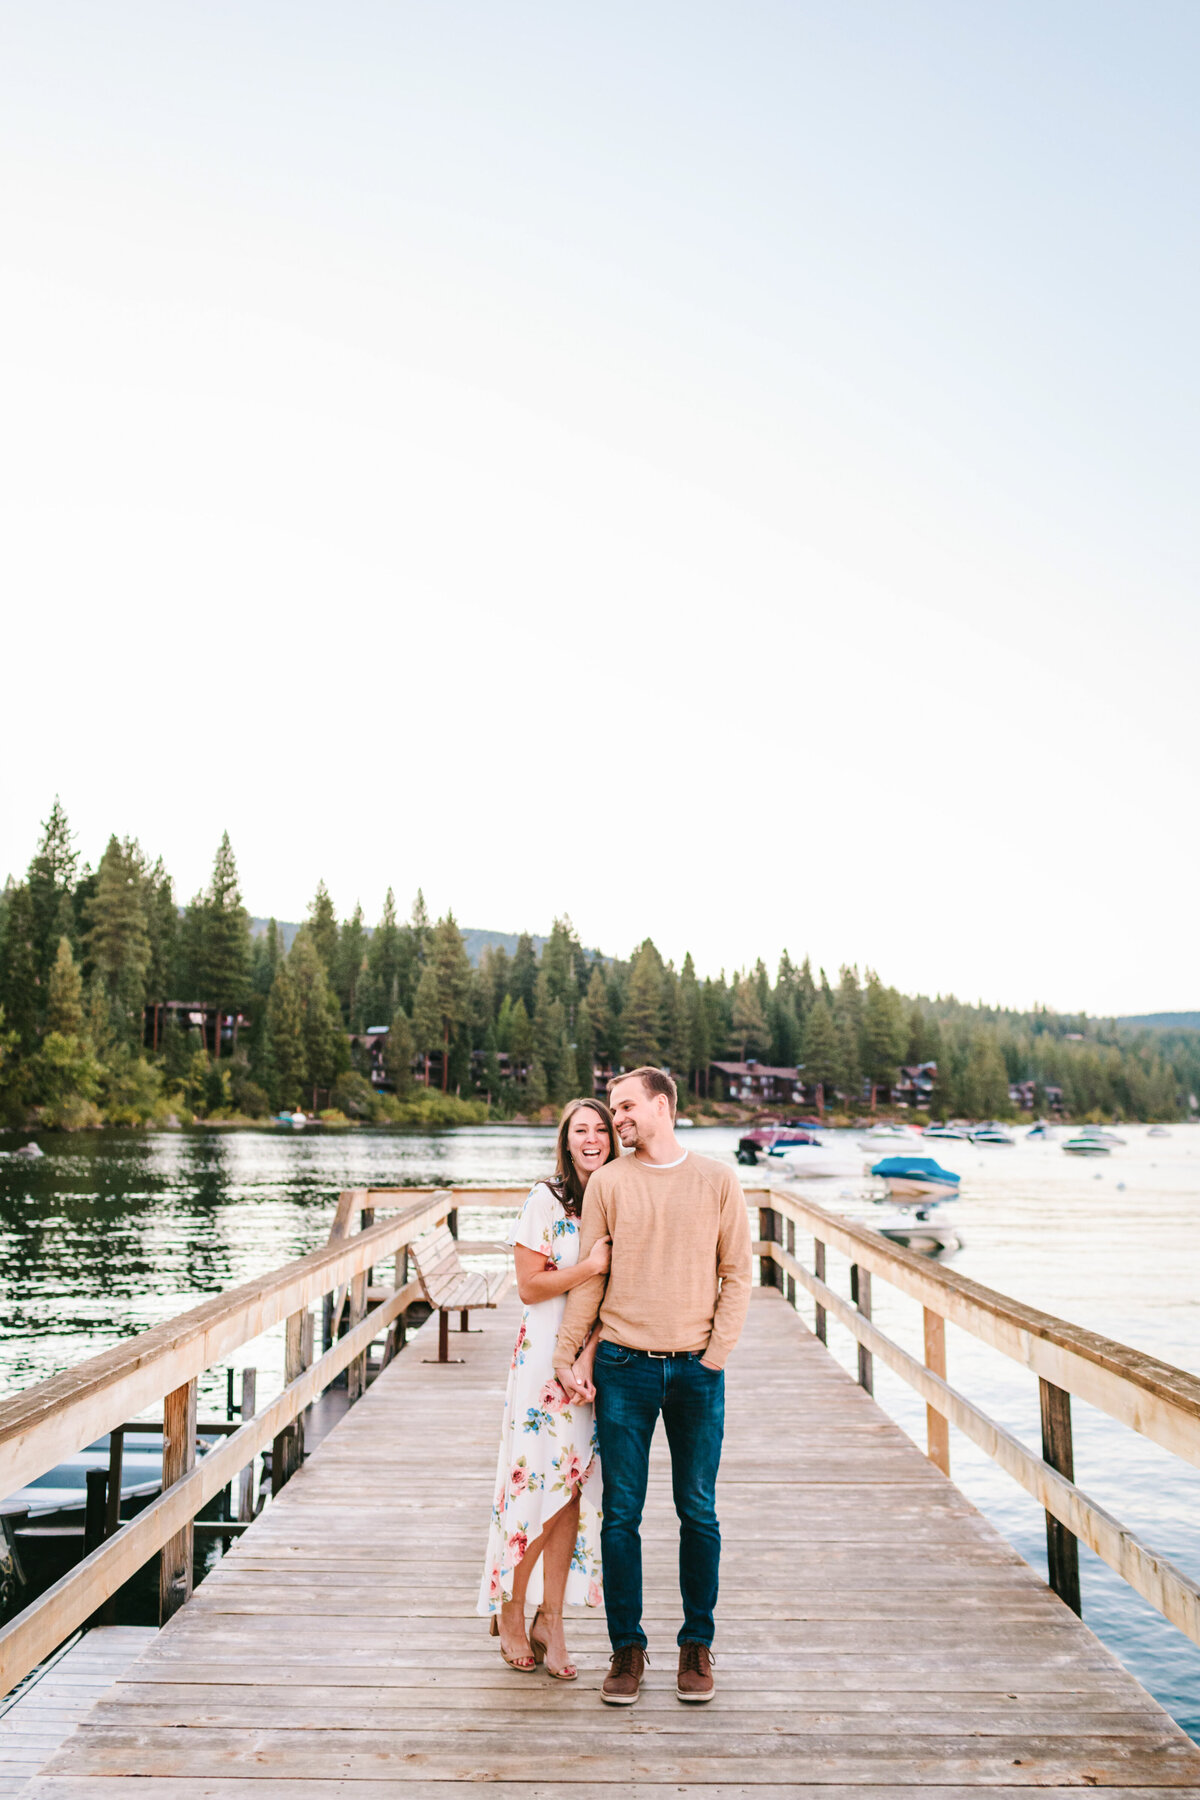 Best California and Texas Engagement Photographer-Jodee Debes Photography-68